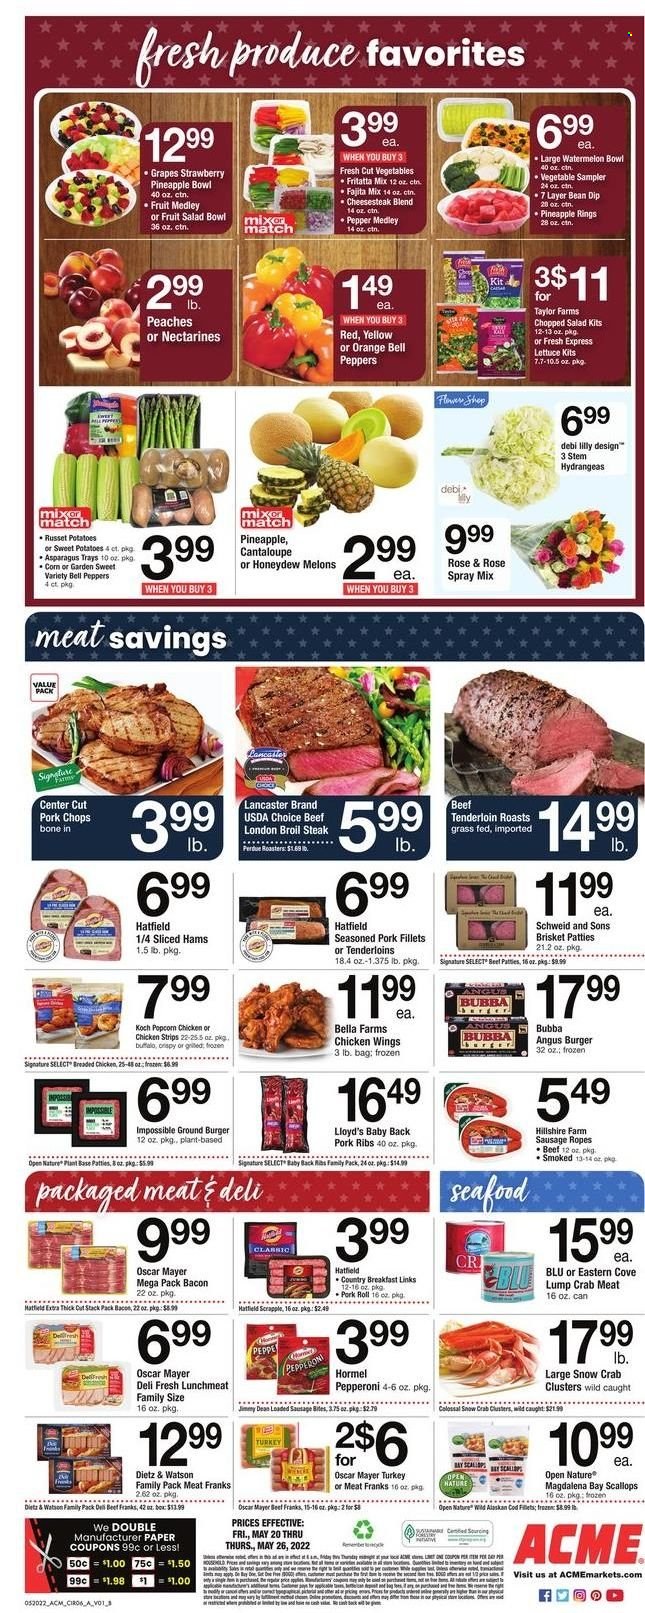 thumbnail - ACME Flyer - 05/20/2022 - 05/26/2022 - Sales products - asparagus, bell peppers, Bella, cantaloupe, russet potatoes, sweet potato, potatoes, peppers, chopped salad, grapes, watermelon, honeydew, pineapple, oranges, cod, crab meat, scallops, crab, hamburger, fried chicken, Perdue®, Jimmy Dean, Hormel, fajita mix, bacon, Hillshire Farm, Oscar Mayer, Dietz & Watson, pepperoni, lunch meat, dip, chicken wings, strips, chicken strips, popcorn, fruit salad, wine, rosé wine, beef meat, steak, beef tenderloin, pork chops, pork meat, pork ribs, pork back ribs, salad bowl, paper, mixer, t-shirt, nectarines, melons, peaches. Page 8.